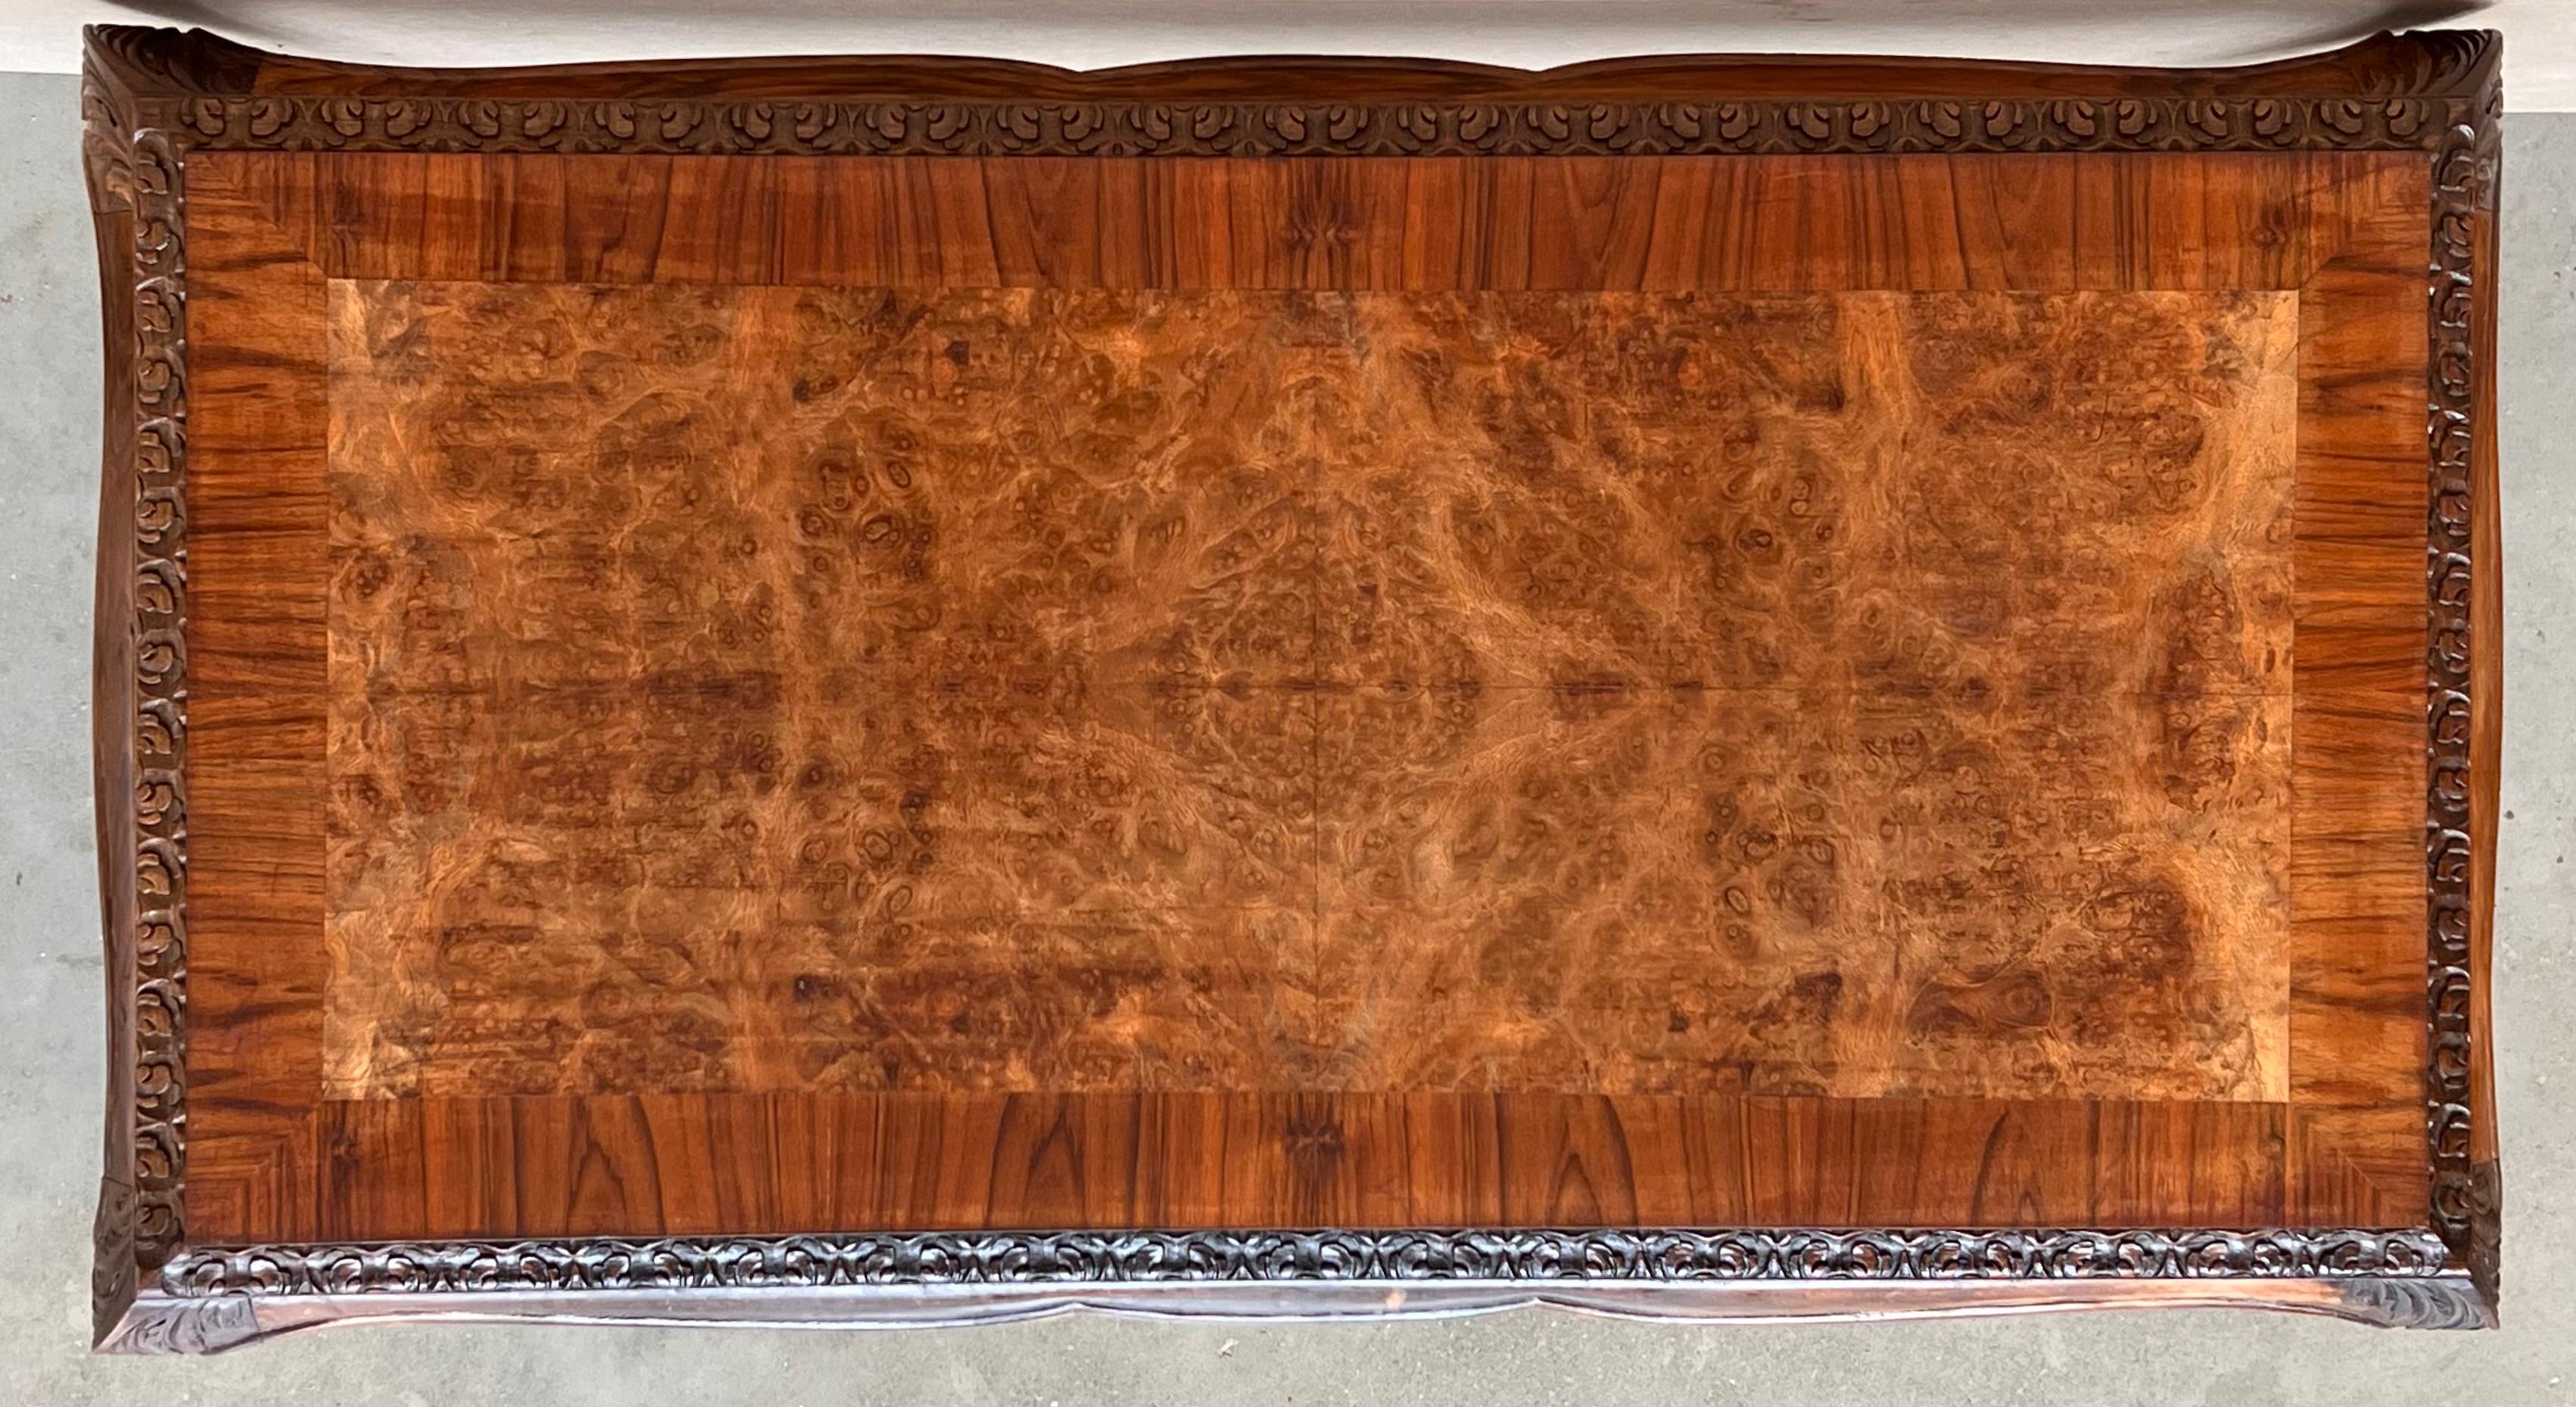 Antique Burl Walnut Queen Anne Style Rectangular Coffee Table For Sale 2